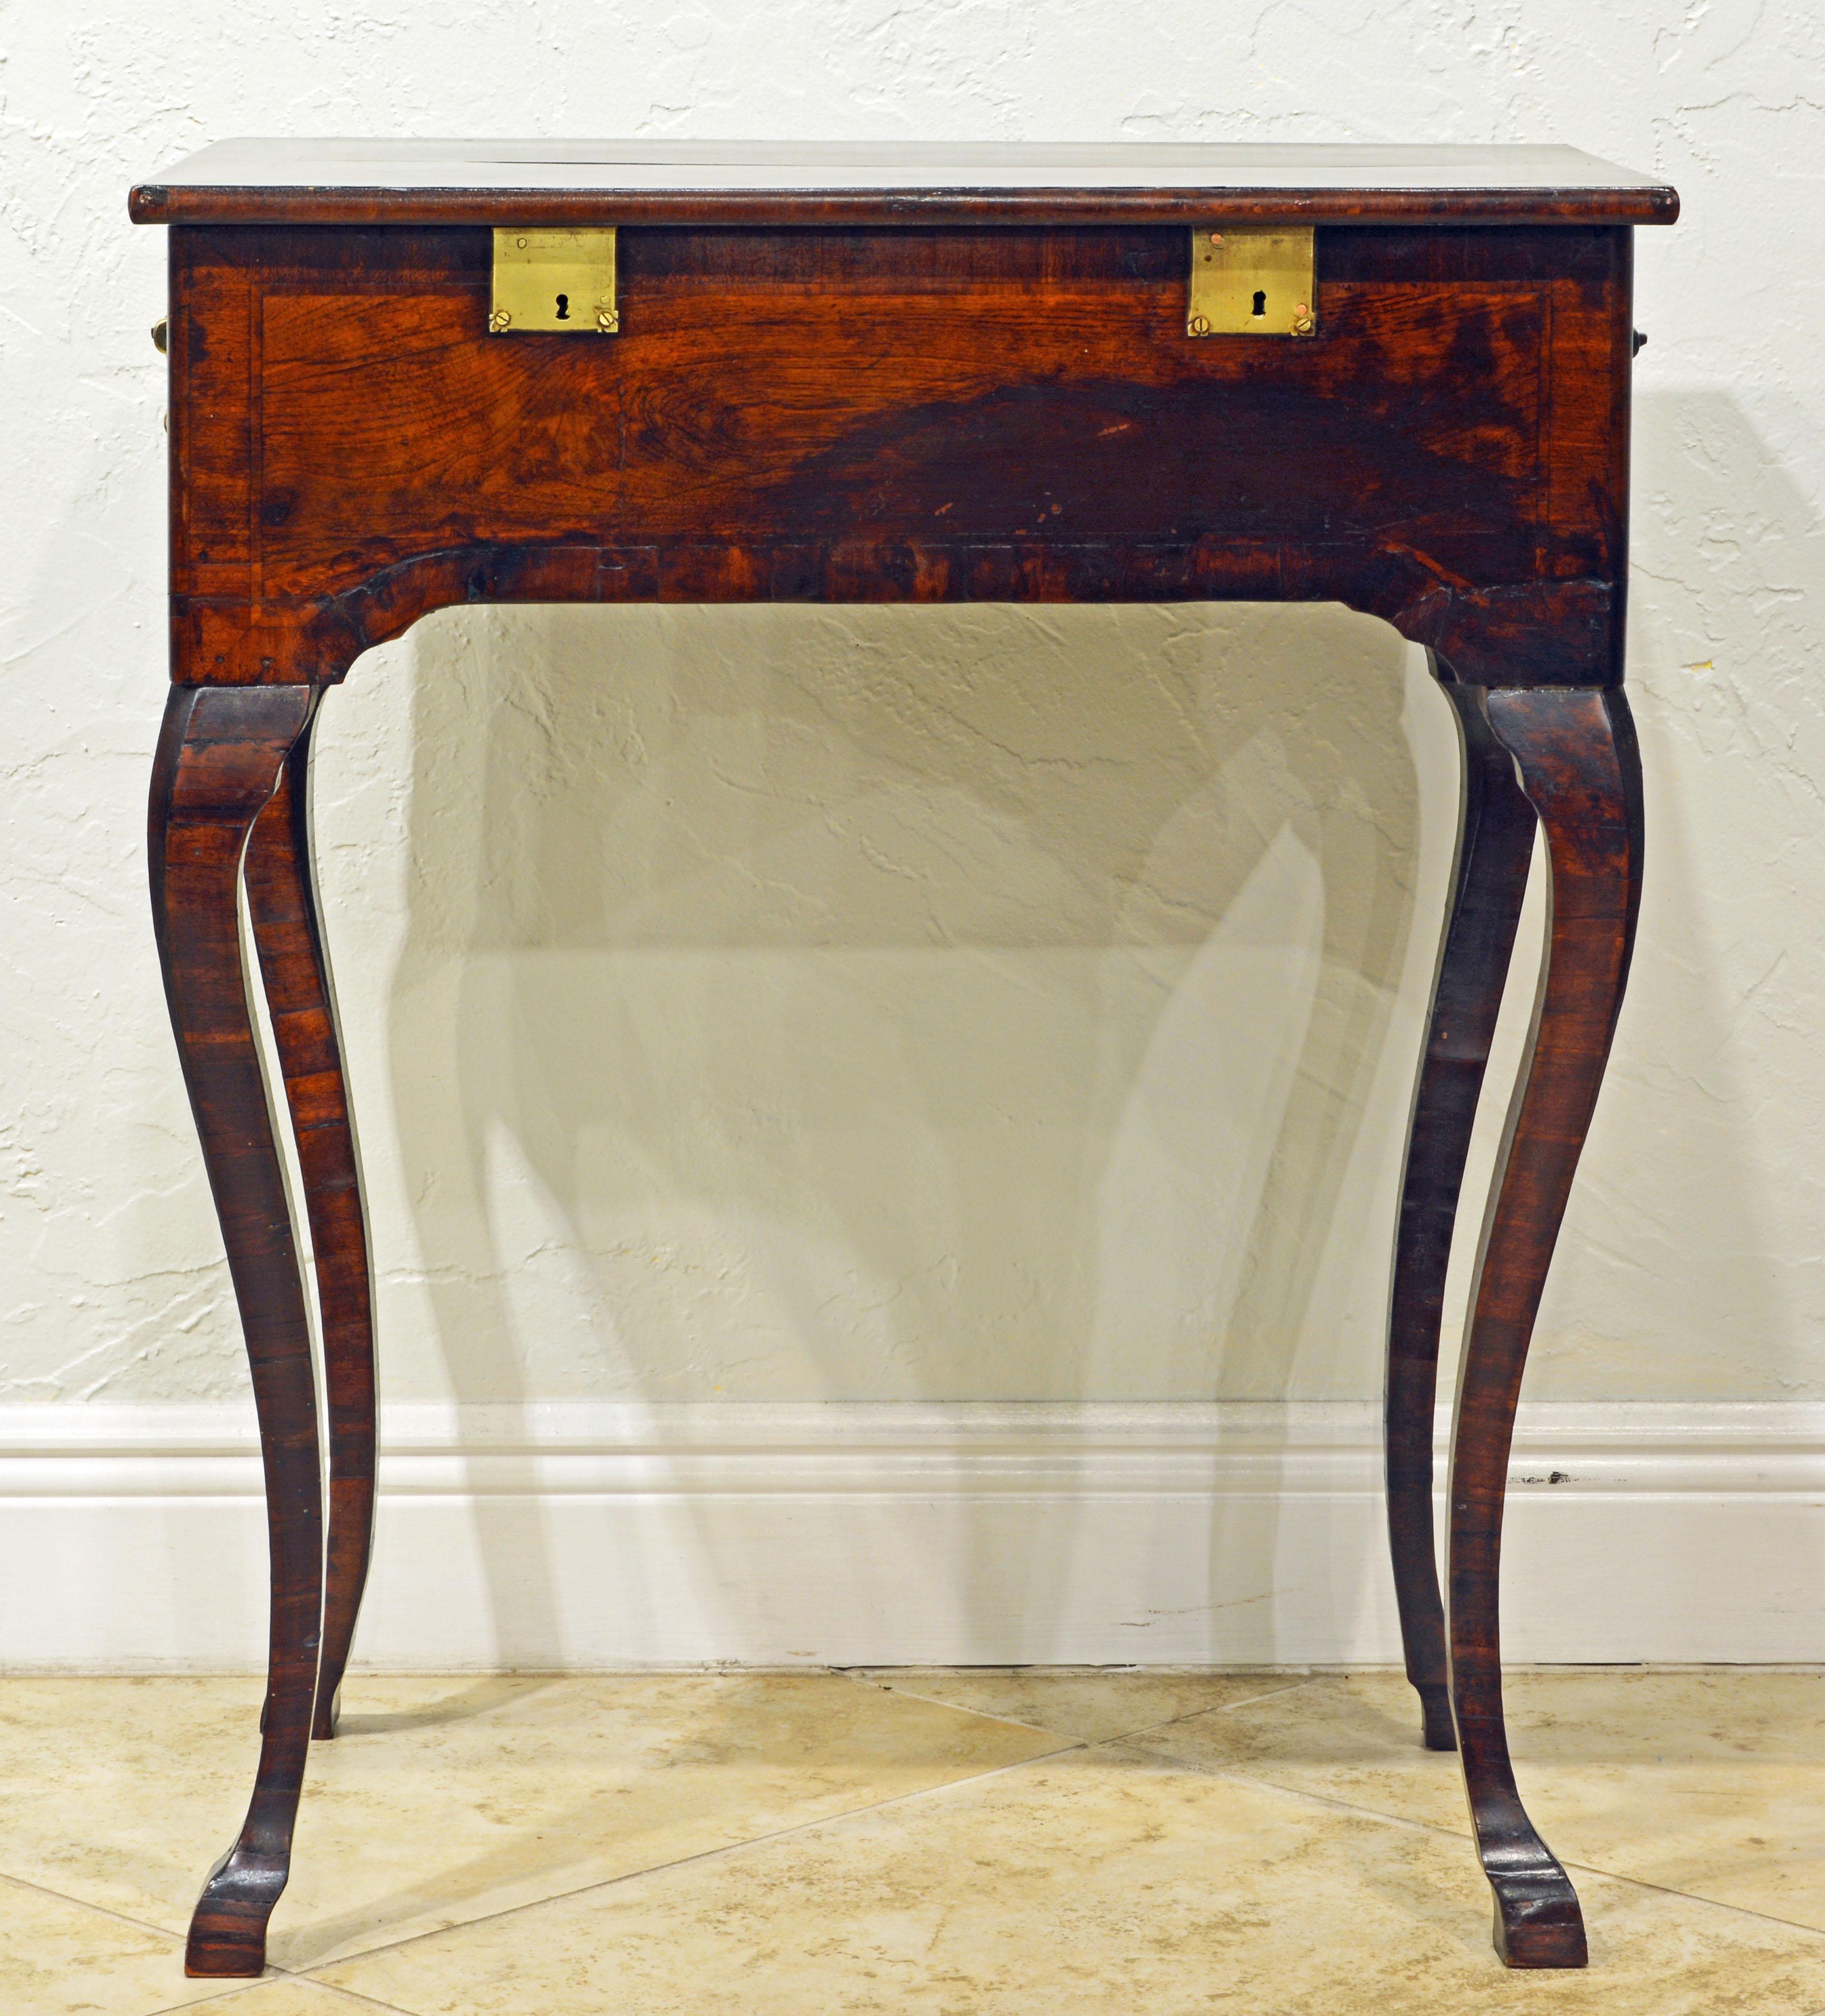 This unusual Spanish Rococo table with cabriole legs likely dates to the second part of the 18th century. It features a top that opens up to a paper lined storage compartment with two brass locks indicating the use for valuables. Each end is mounted